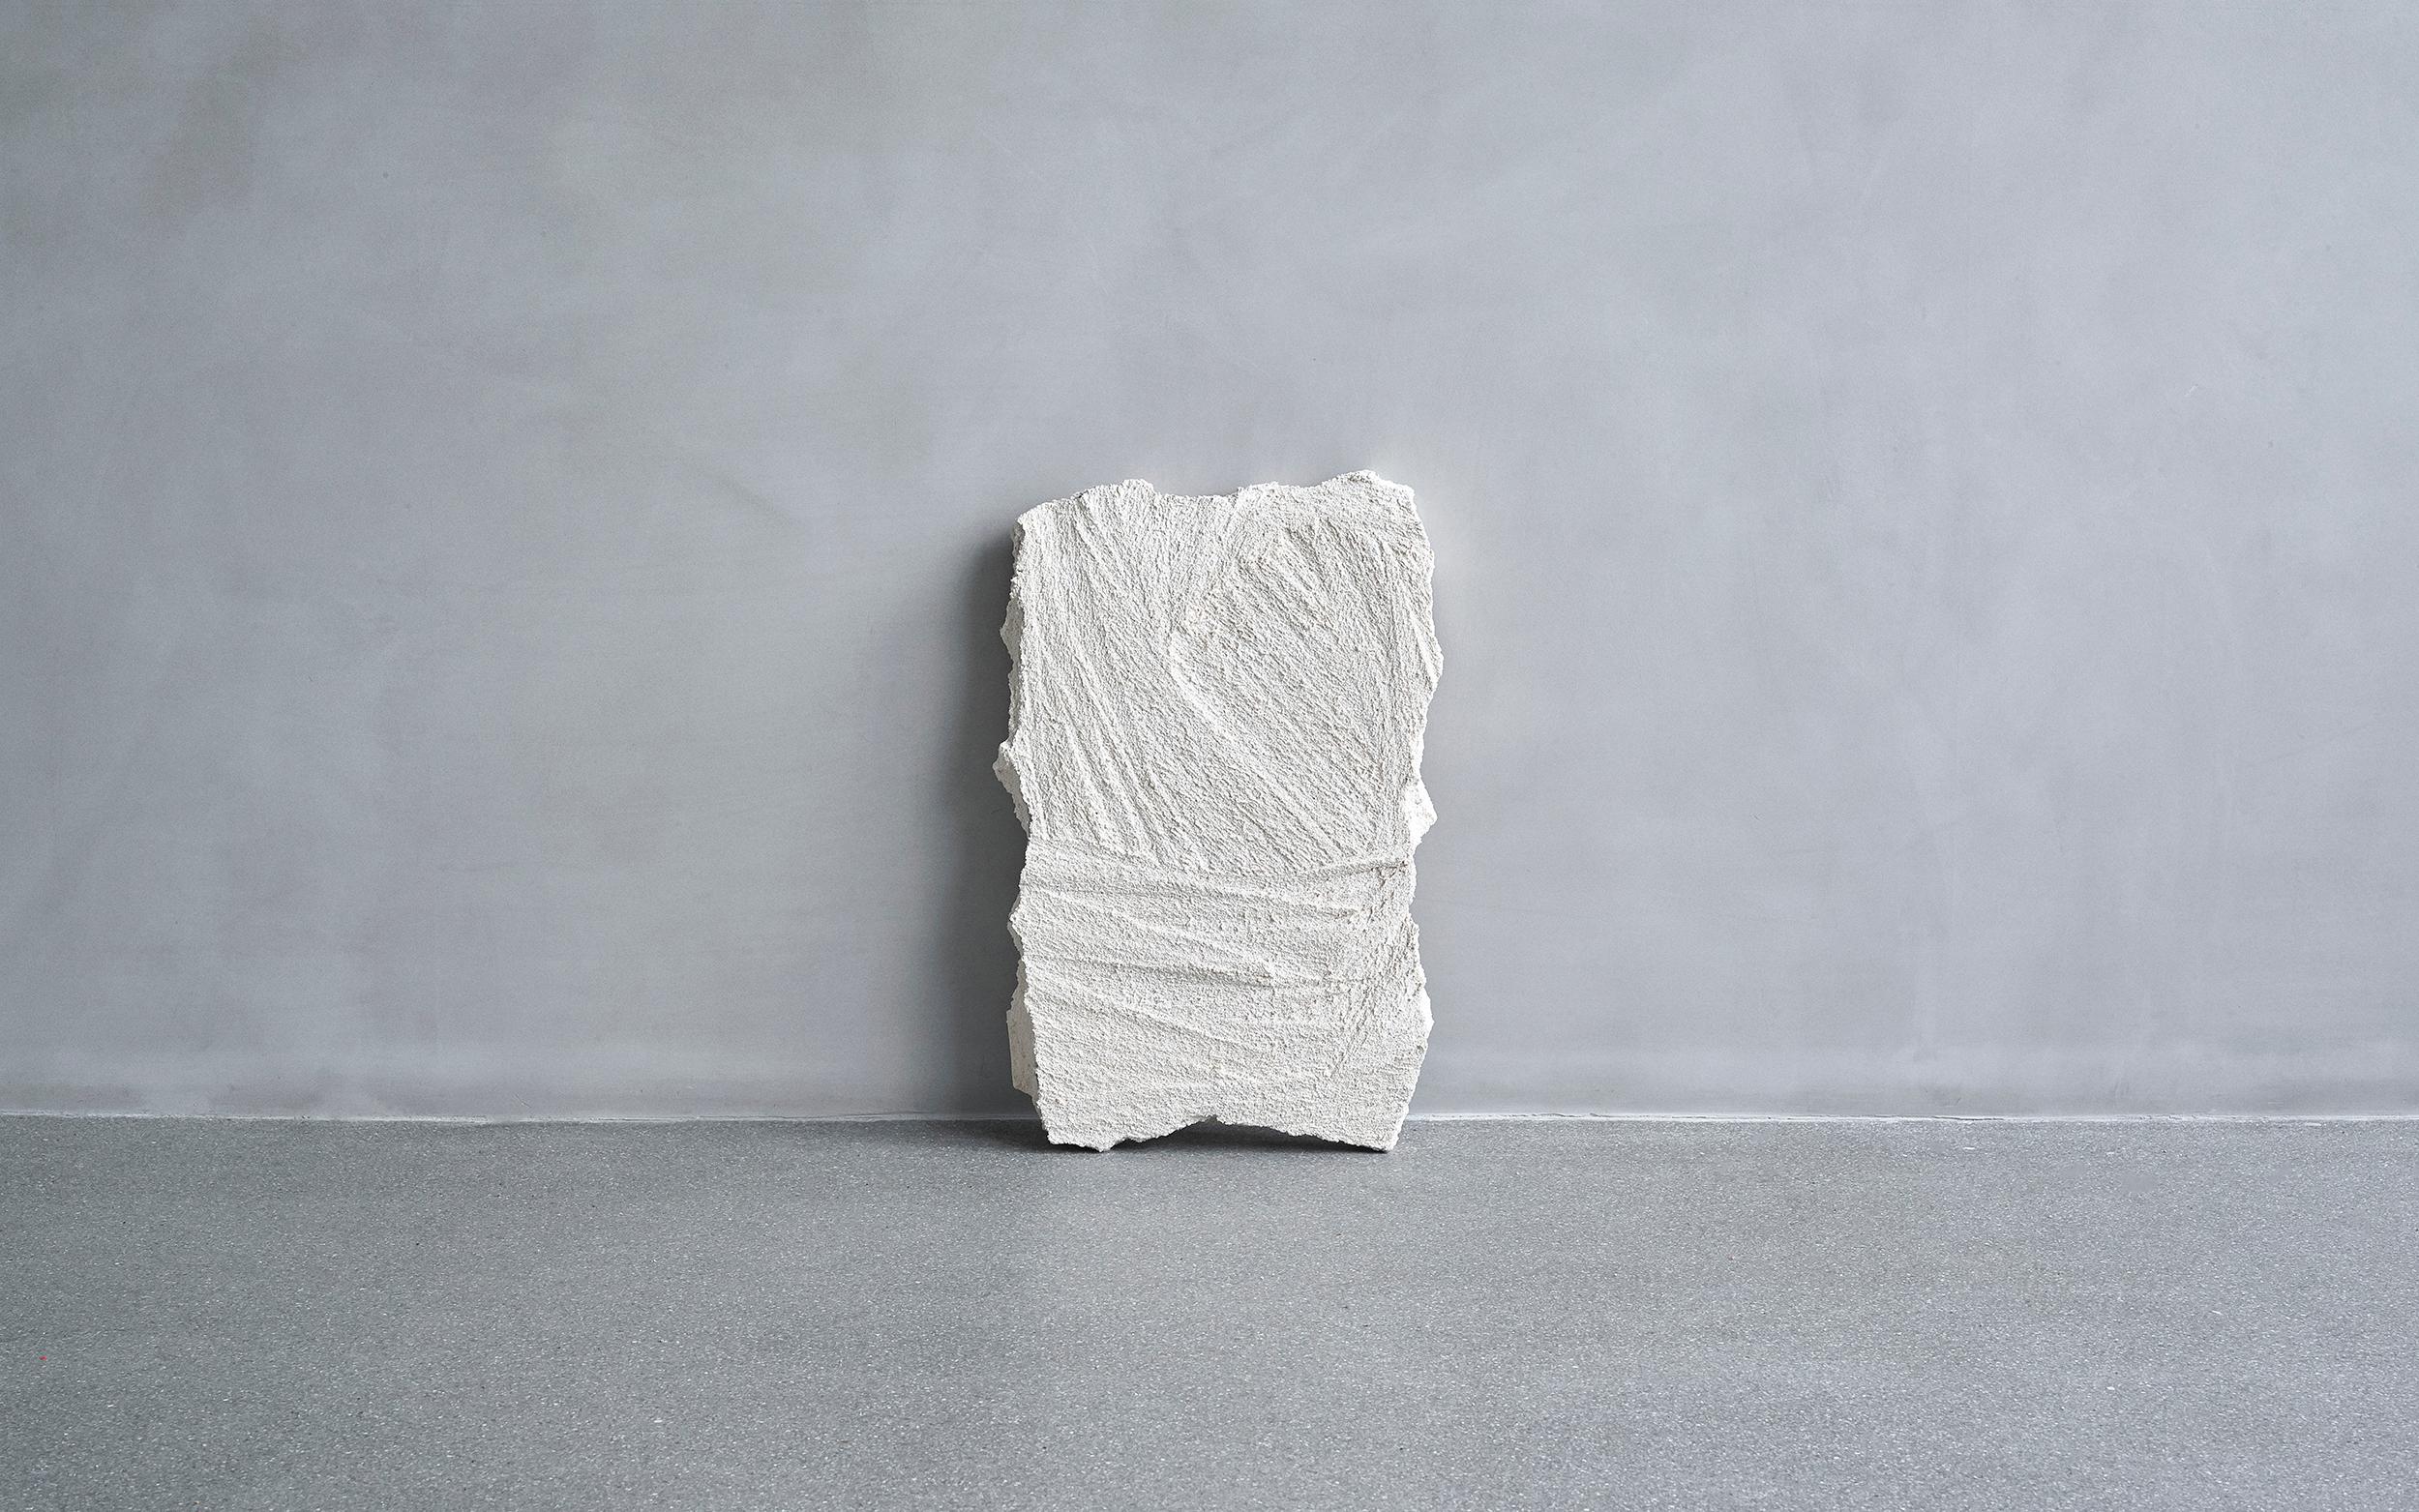 Rock pond wall piece by Andredottir & Bobek
Dimensions: W 320 x H 450 cm
Materials: Reused Foam/mattress and Jesmontite Hardner in Color Grey

Artificial Nature is a collaboration between the artist and design duo Josephine Andredottir and Emilie